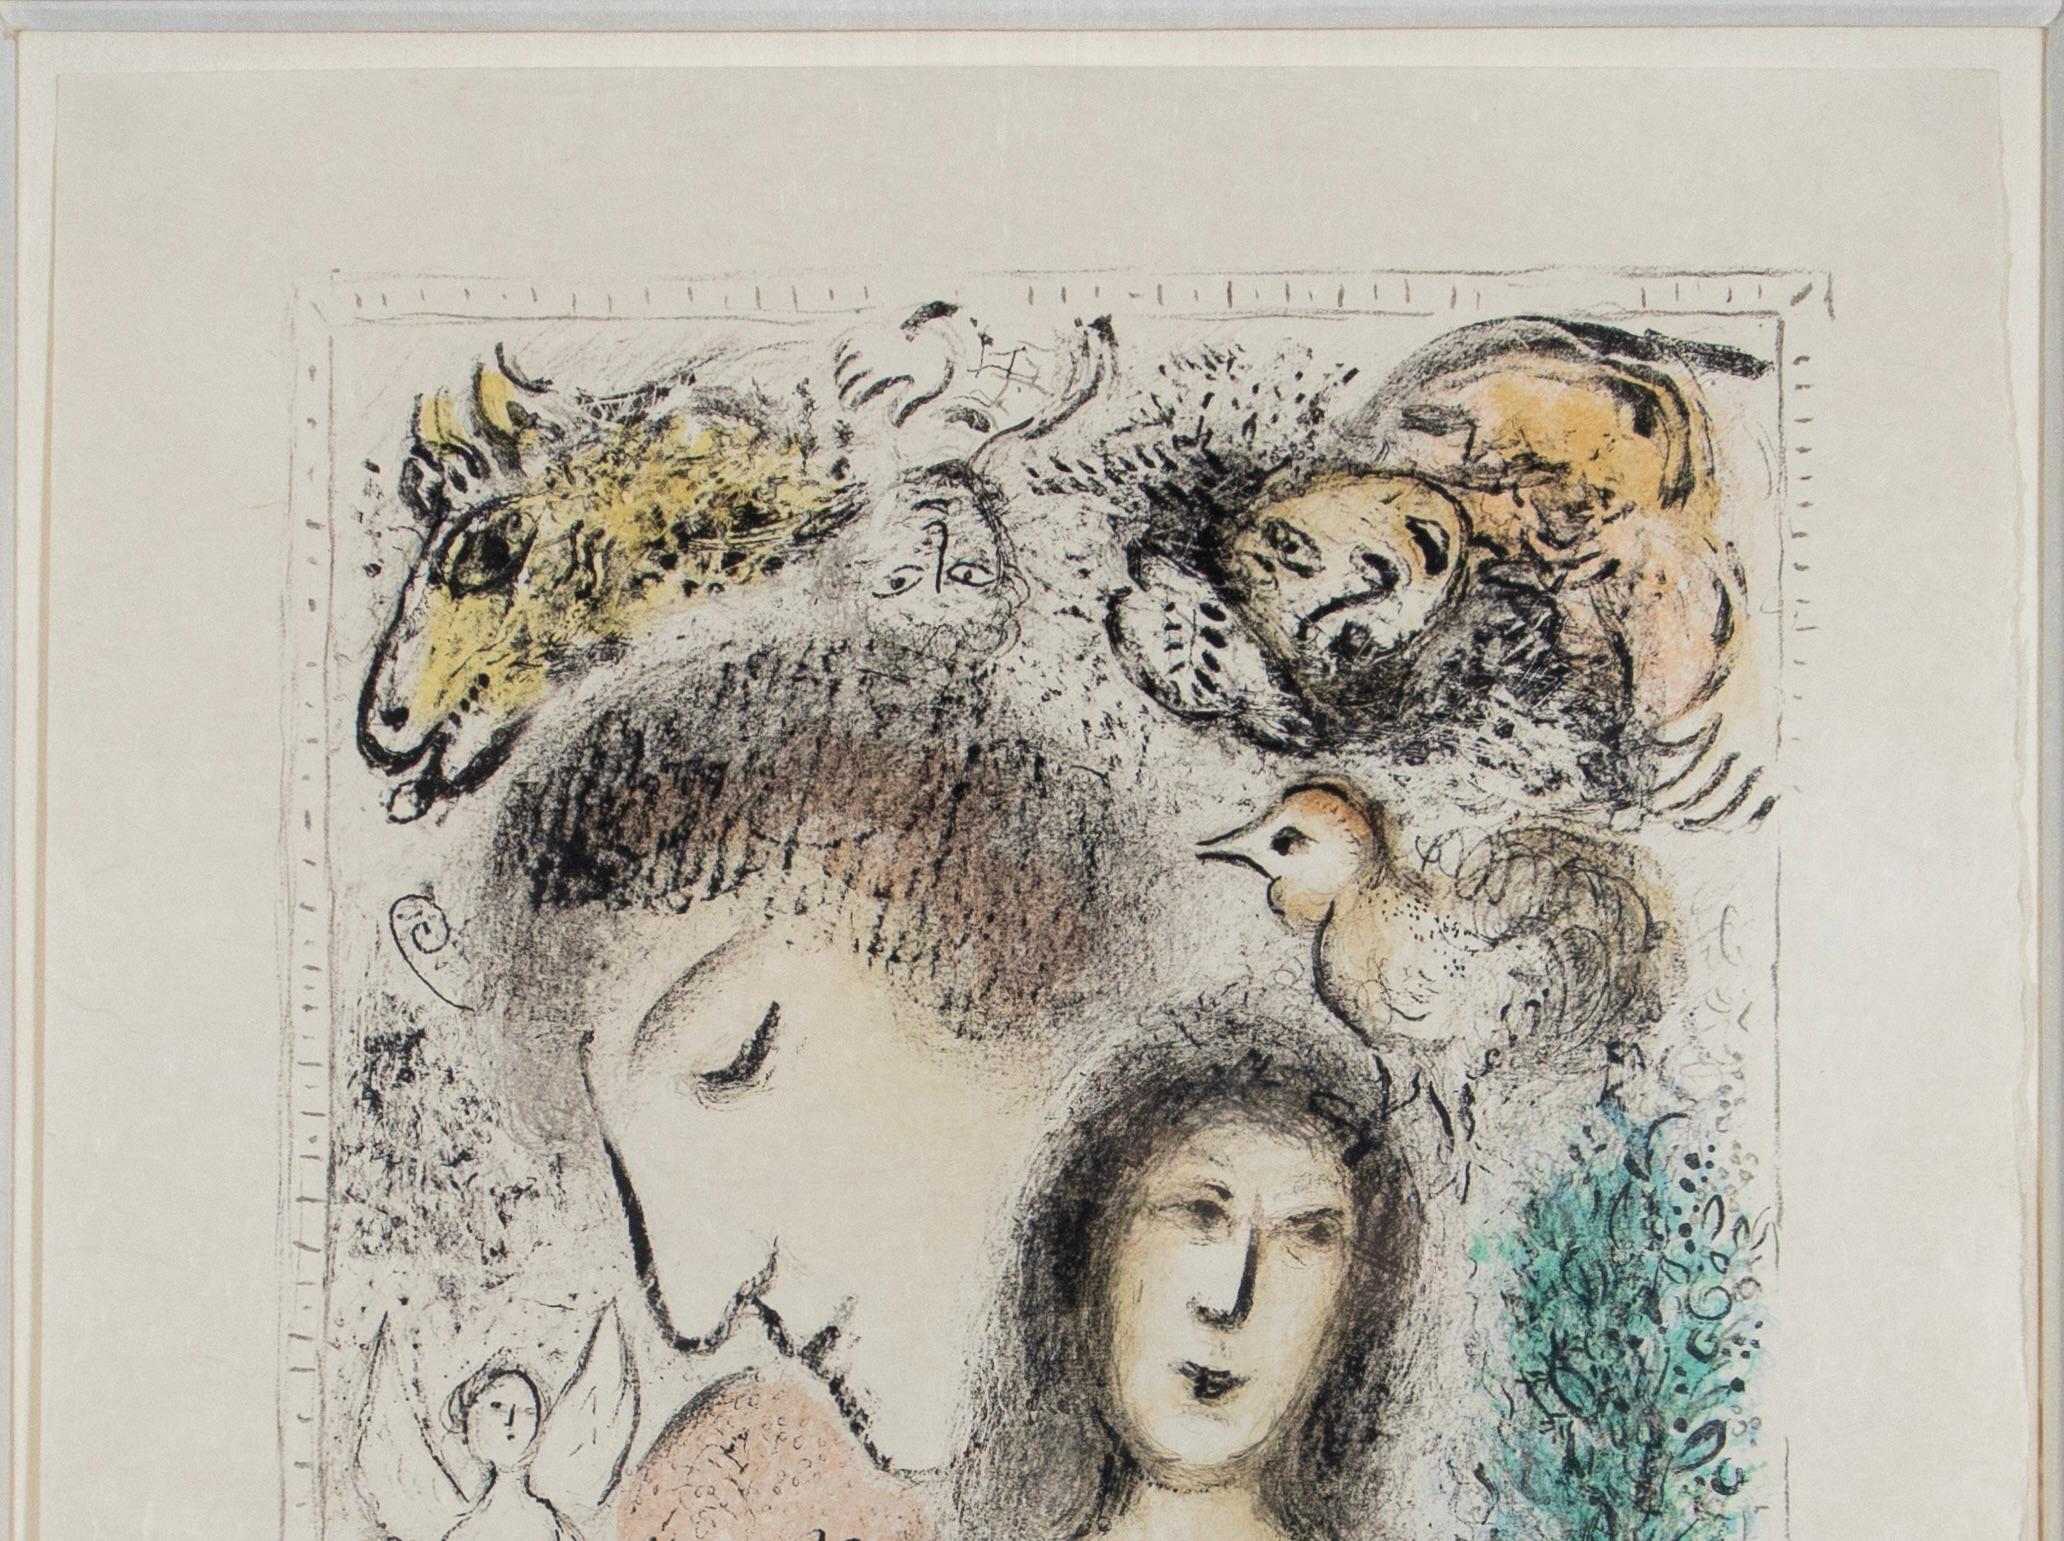 “Le Nu” The Nude - Color lithograph 1978 - Framed - Signed - angel, bird - Modern Print by Marc Chagall